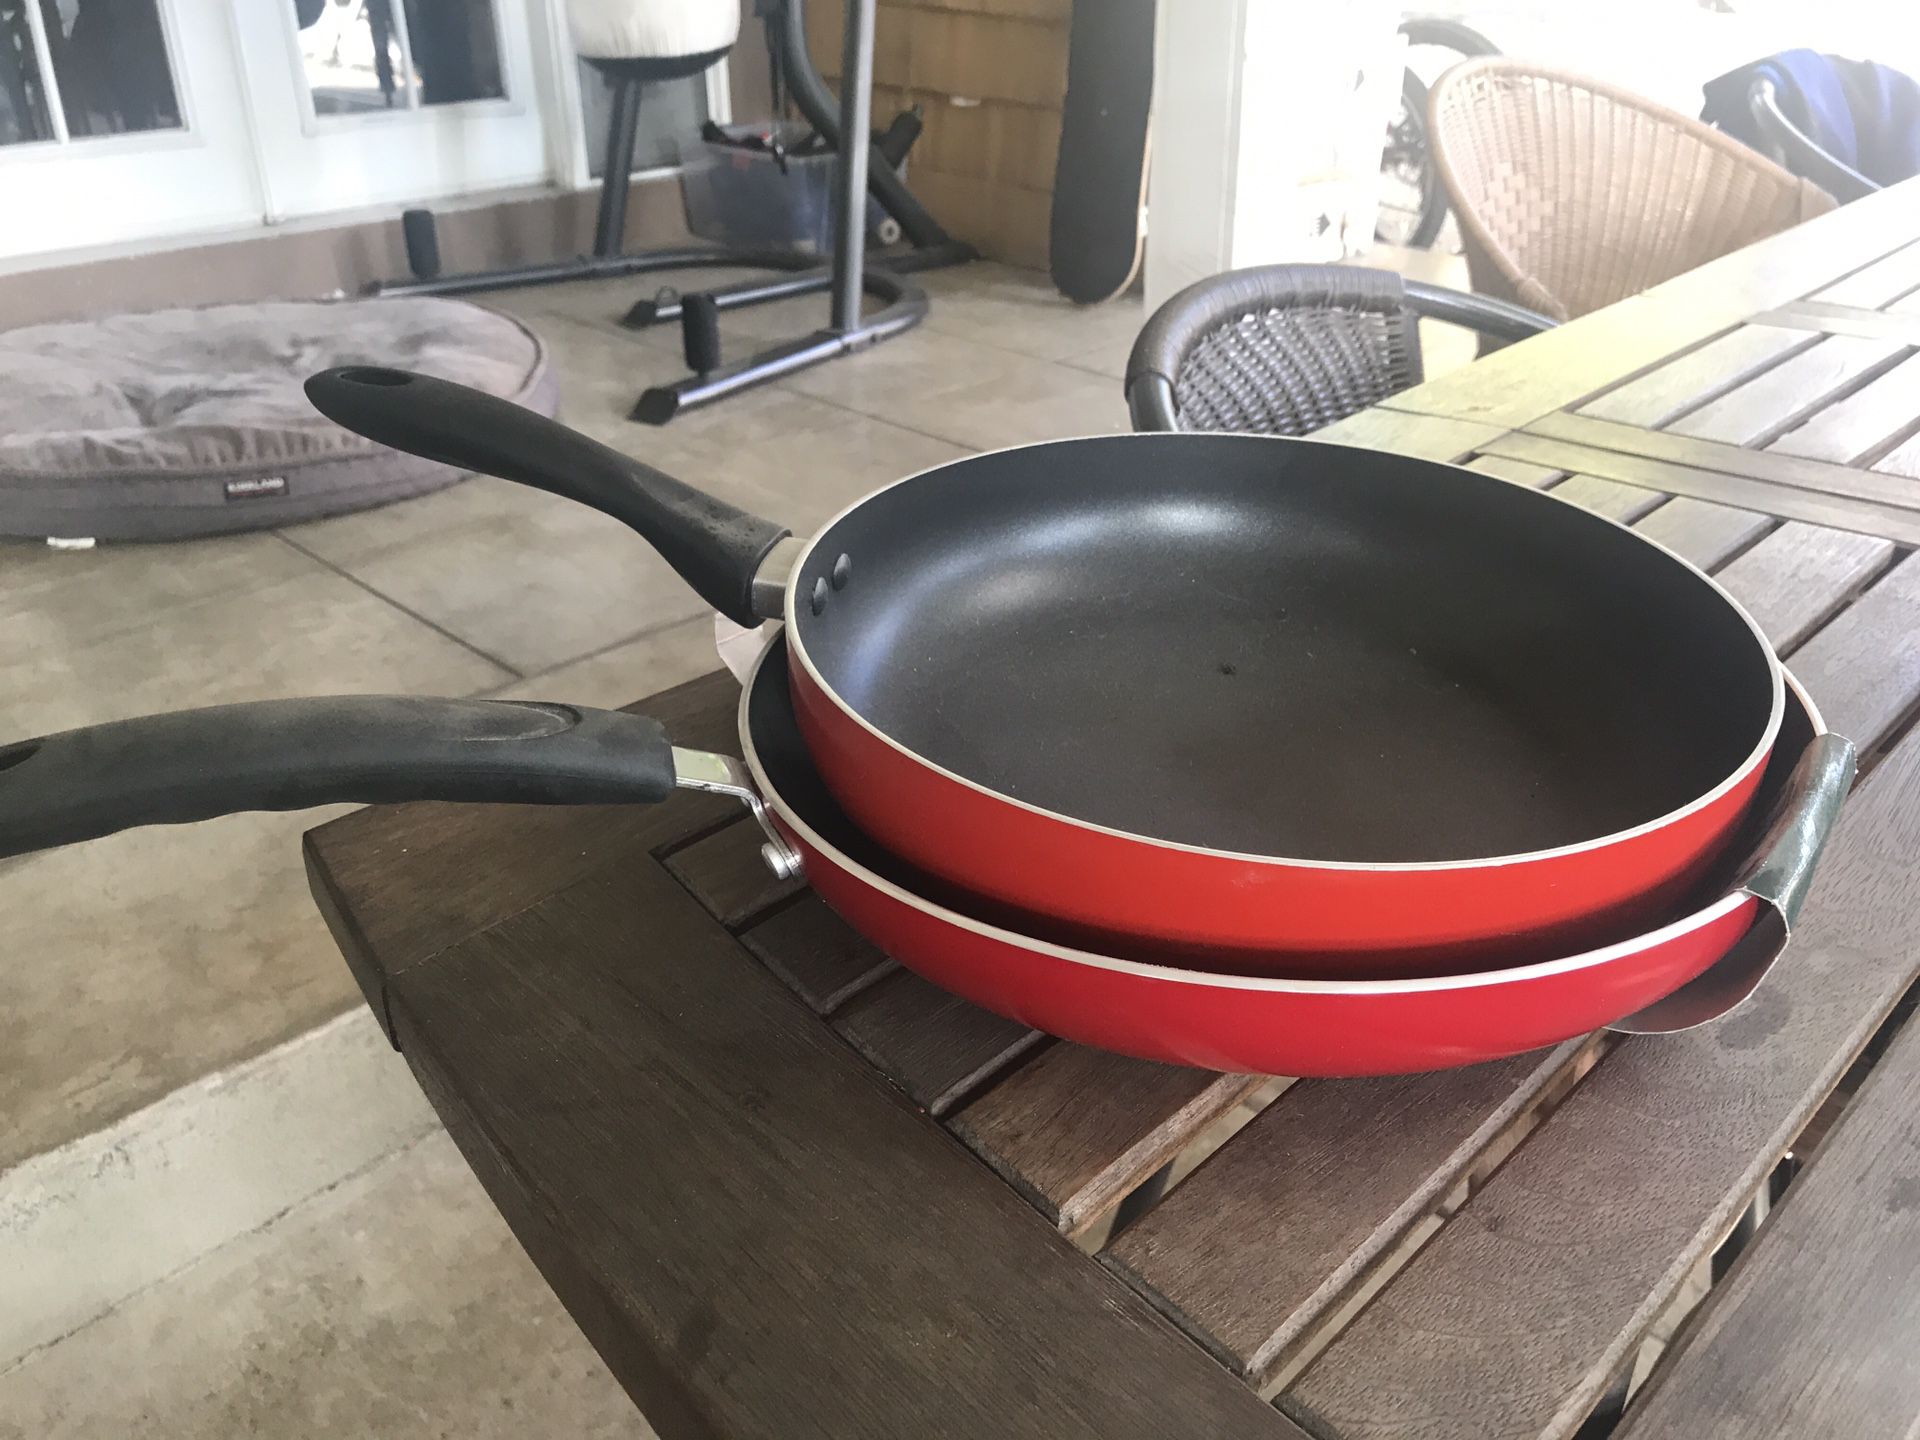 Brand new Cookright silicone frying pans.